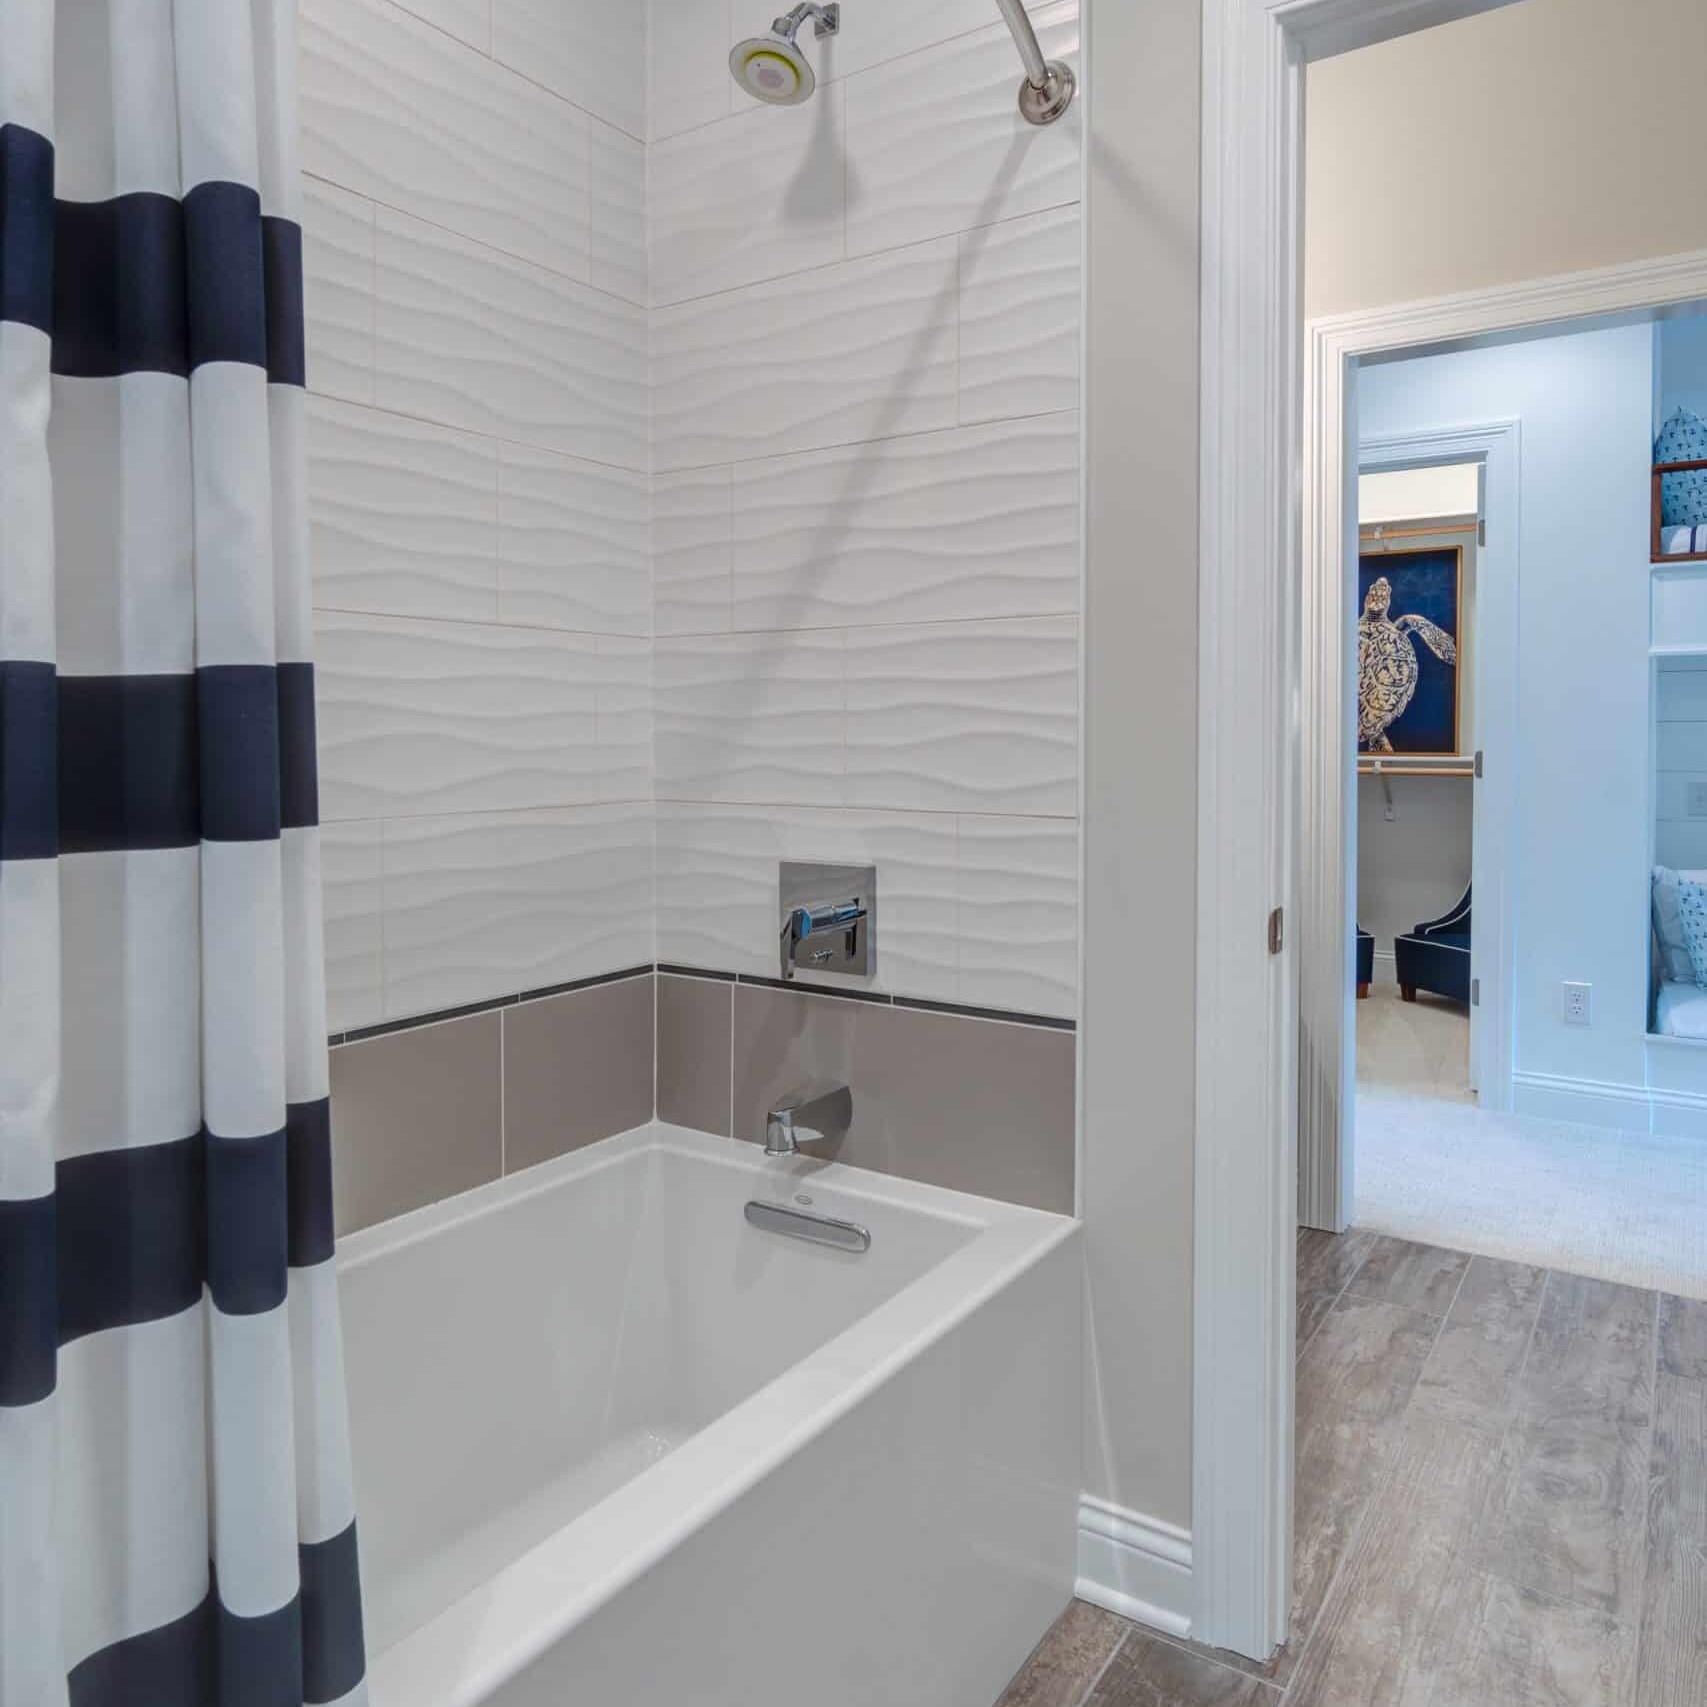 A bathroom with a new home construction indianapolis indiana and homes for sale westfield in.